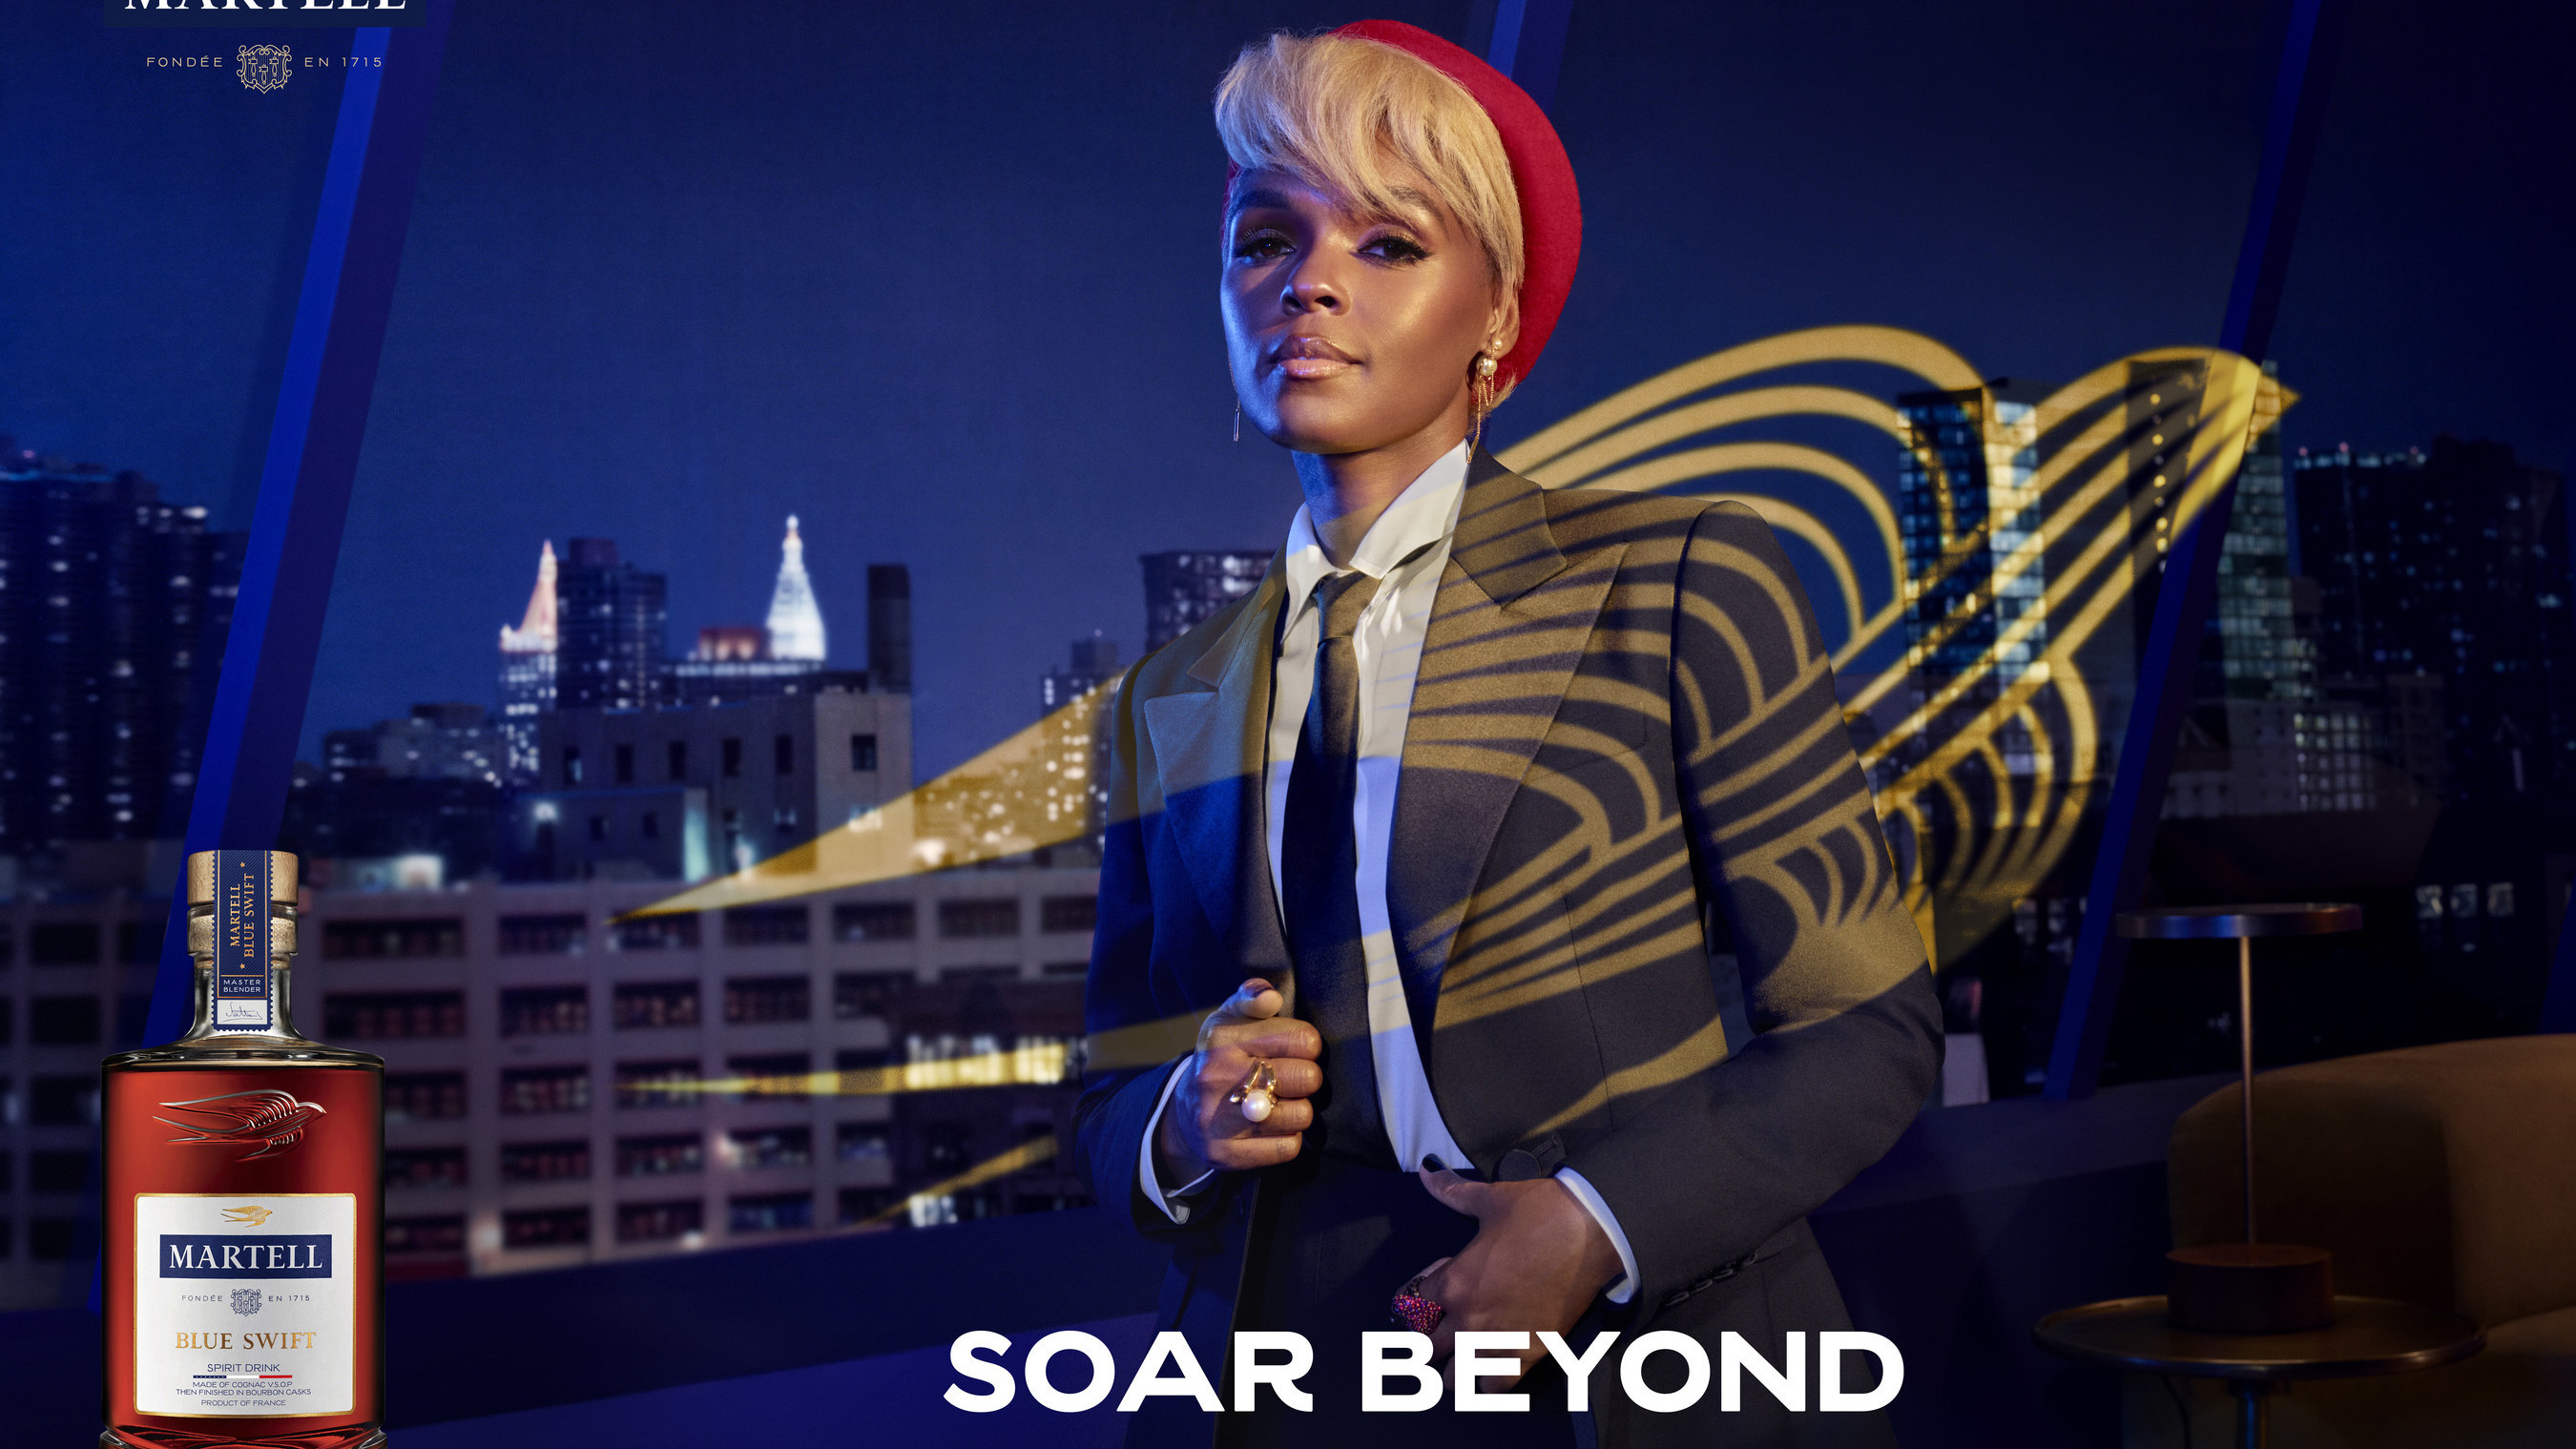 Martell Cognac Teams Up With Janelle Monáe For "Soar Beyond the Expected" Campaign